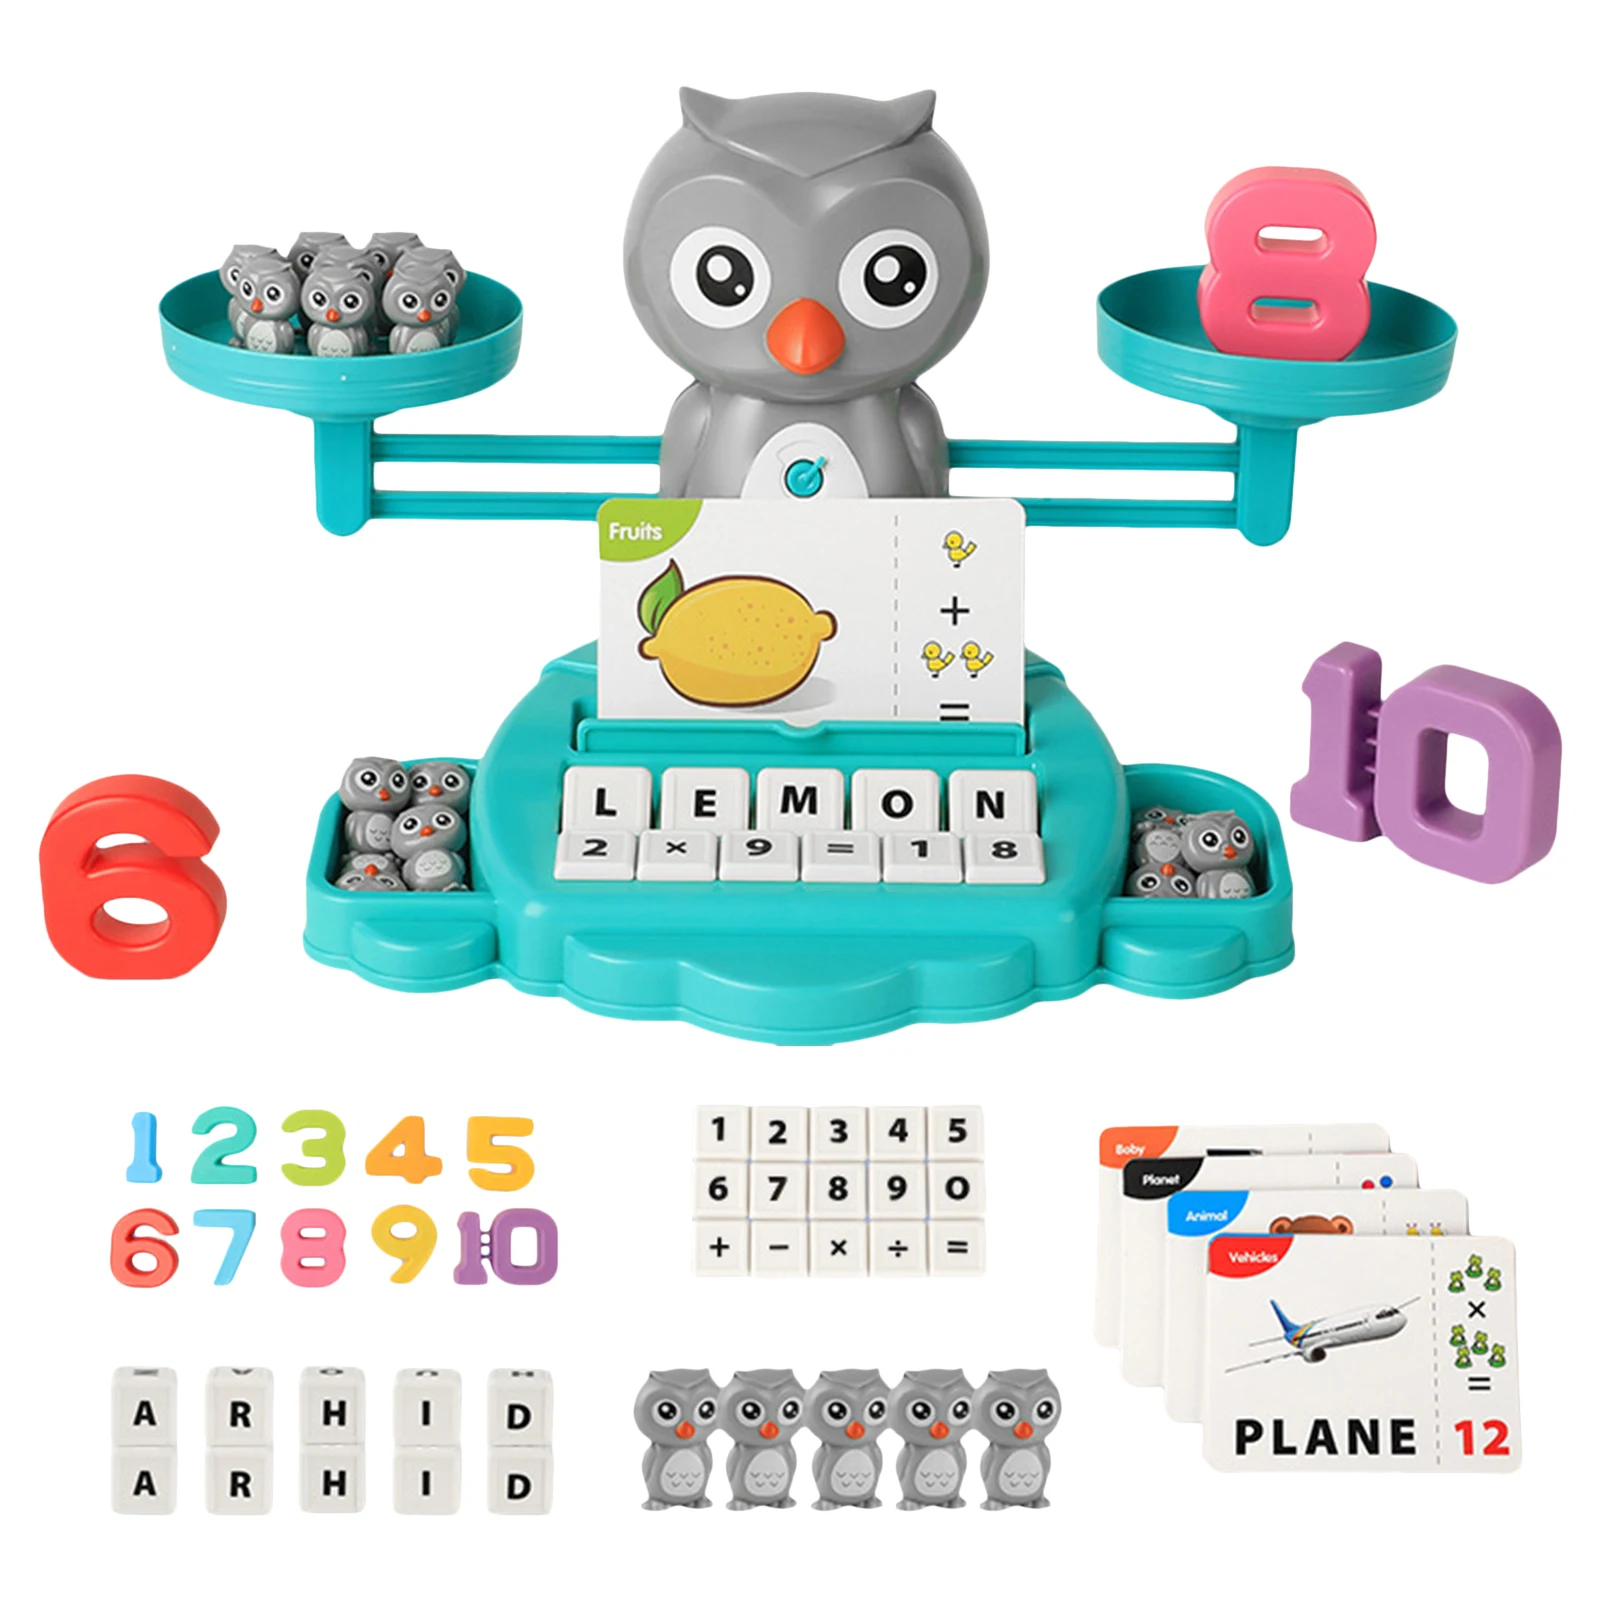 

Math Games For Kids Owl Balance Counting Games Toy For Age 3-5 Toddlers Number Counting Words Learning Scale Toy Set Kids